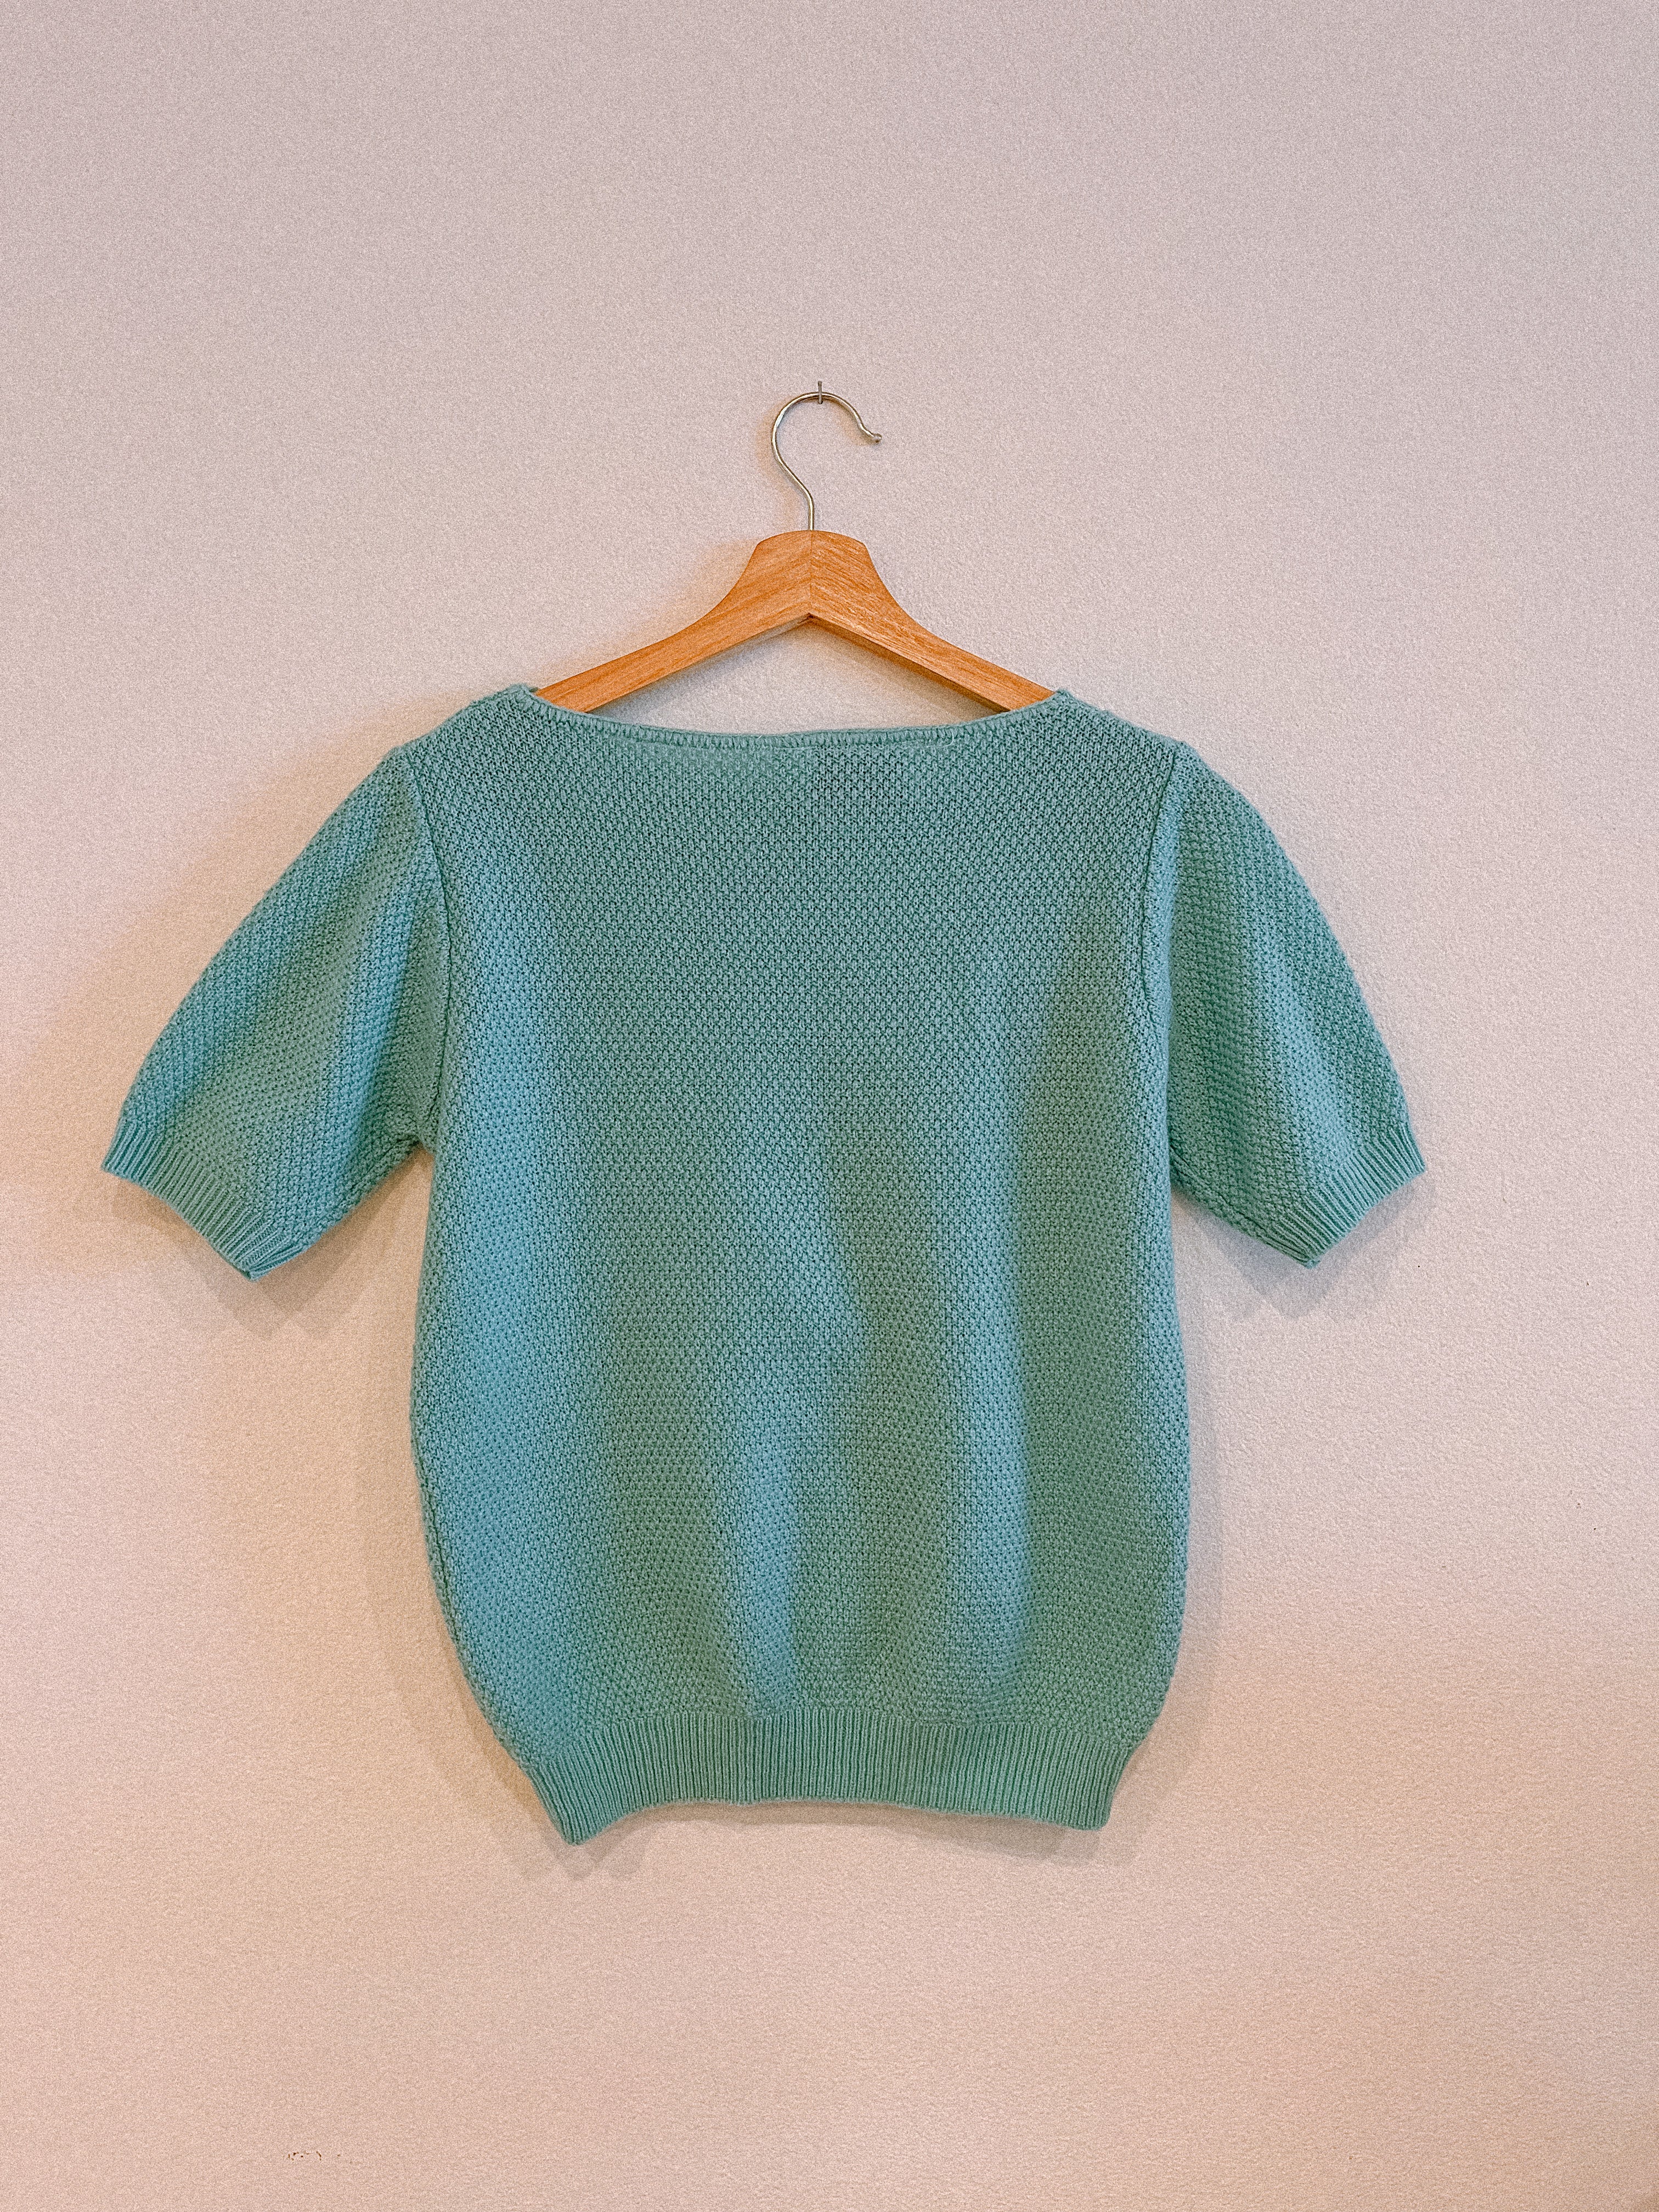 Baby Blue Knit Sweater Tee